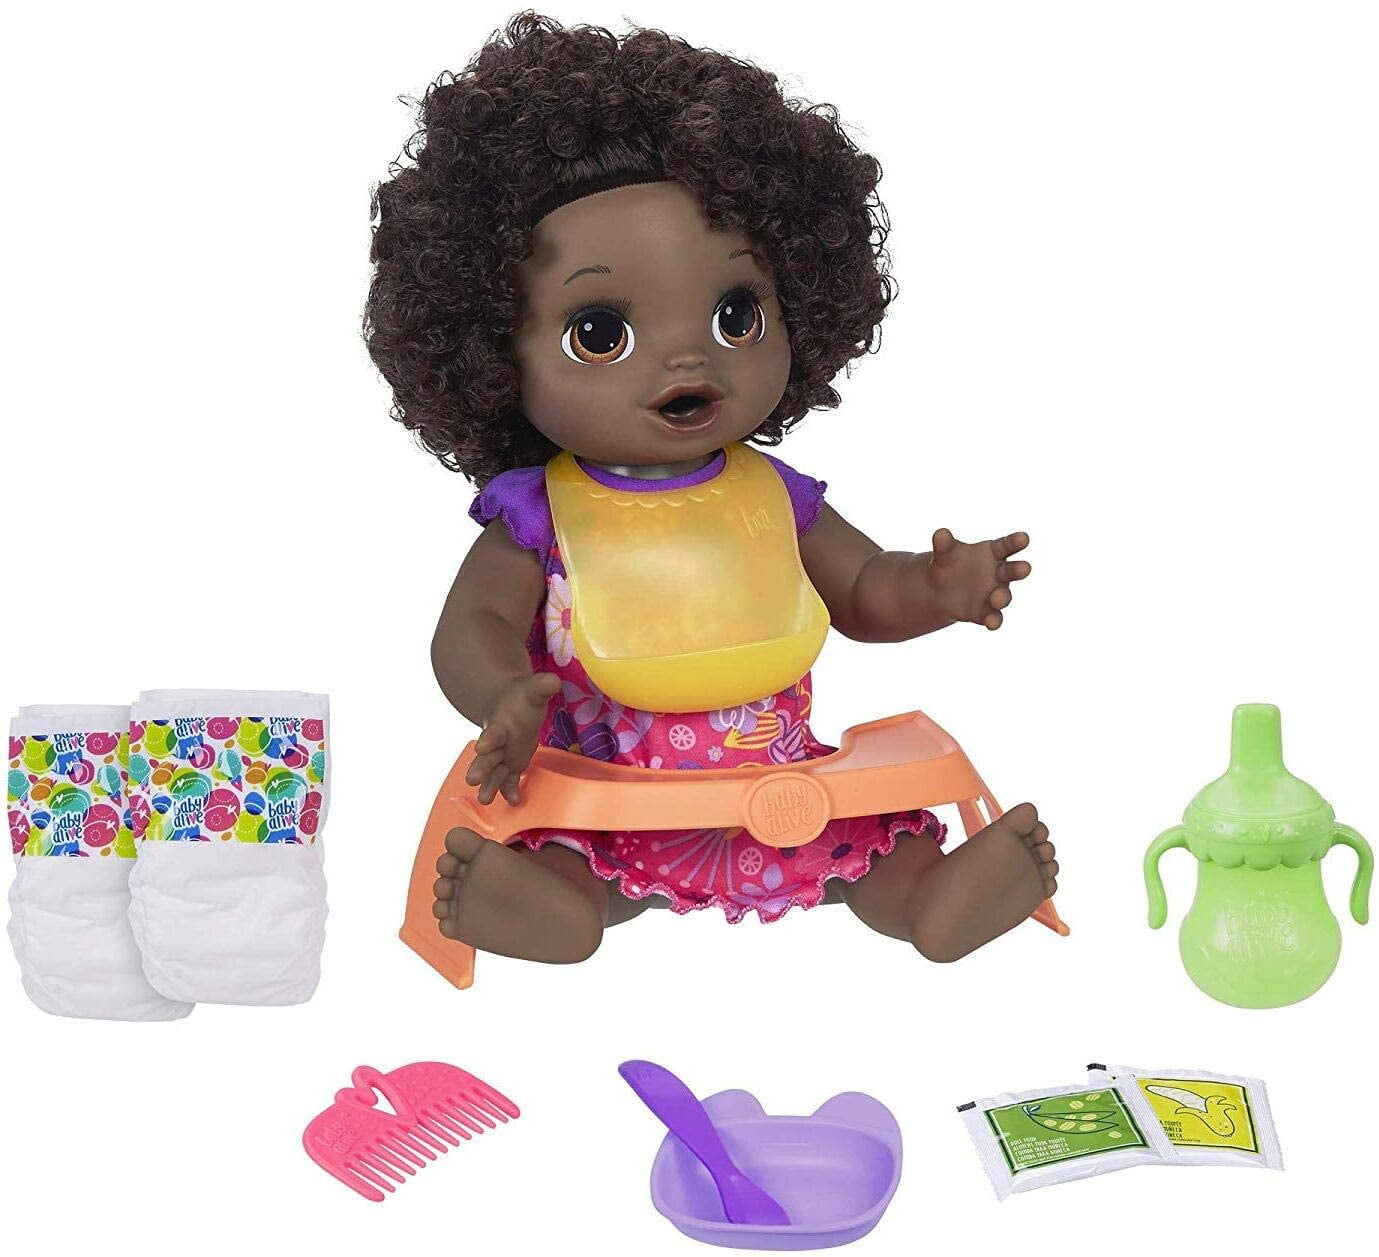 Baby Alive Happy Hungry Baby Black Curly Hair Doll, Makes 50+ Sounds & Phrases, Eats & Poops, Drinks & Wets, for Kids Age 3 & Up, Baby loves to.., By Visit the Baby Alive Store